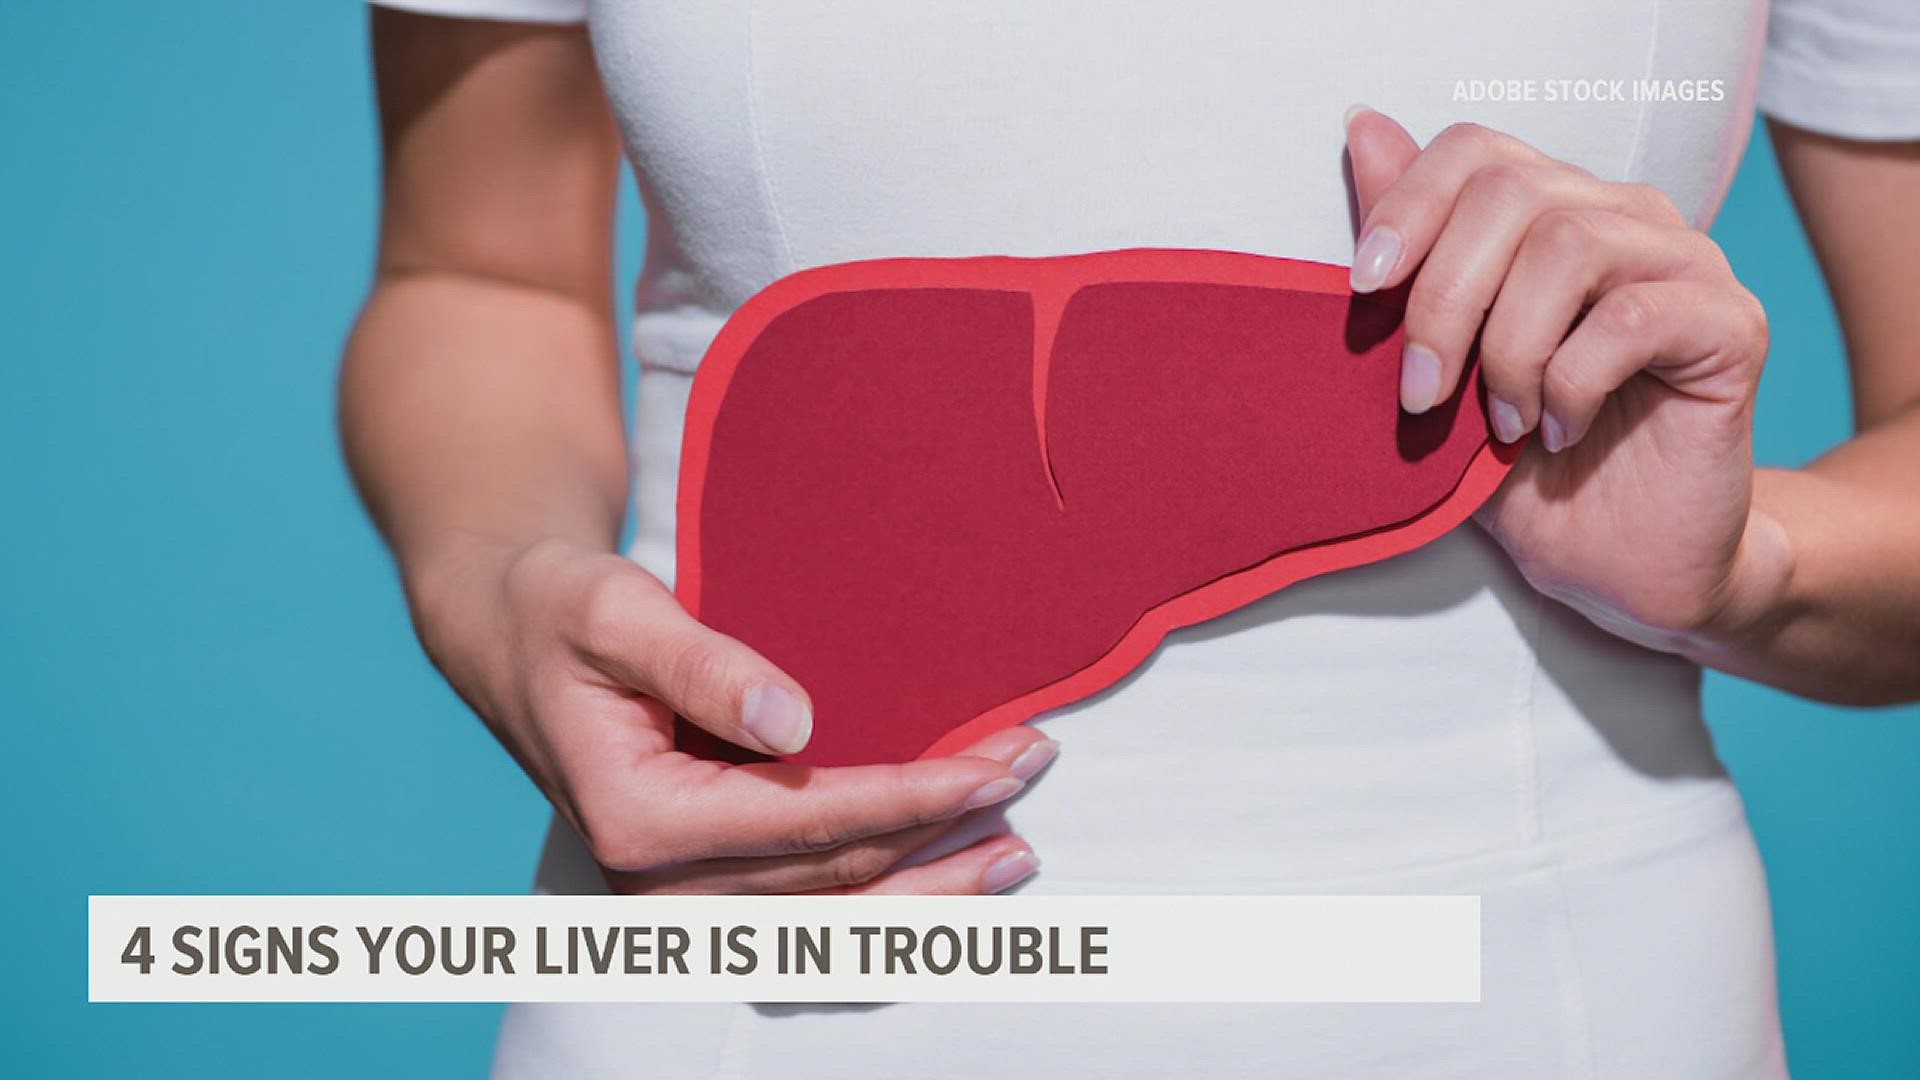 The liver is one of the toughest organs in the body and a healthy one is critical for your overall health.